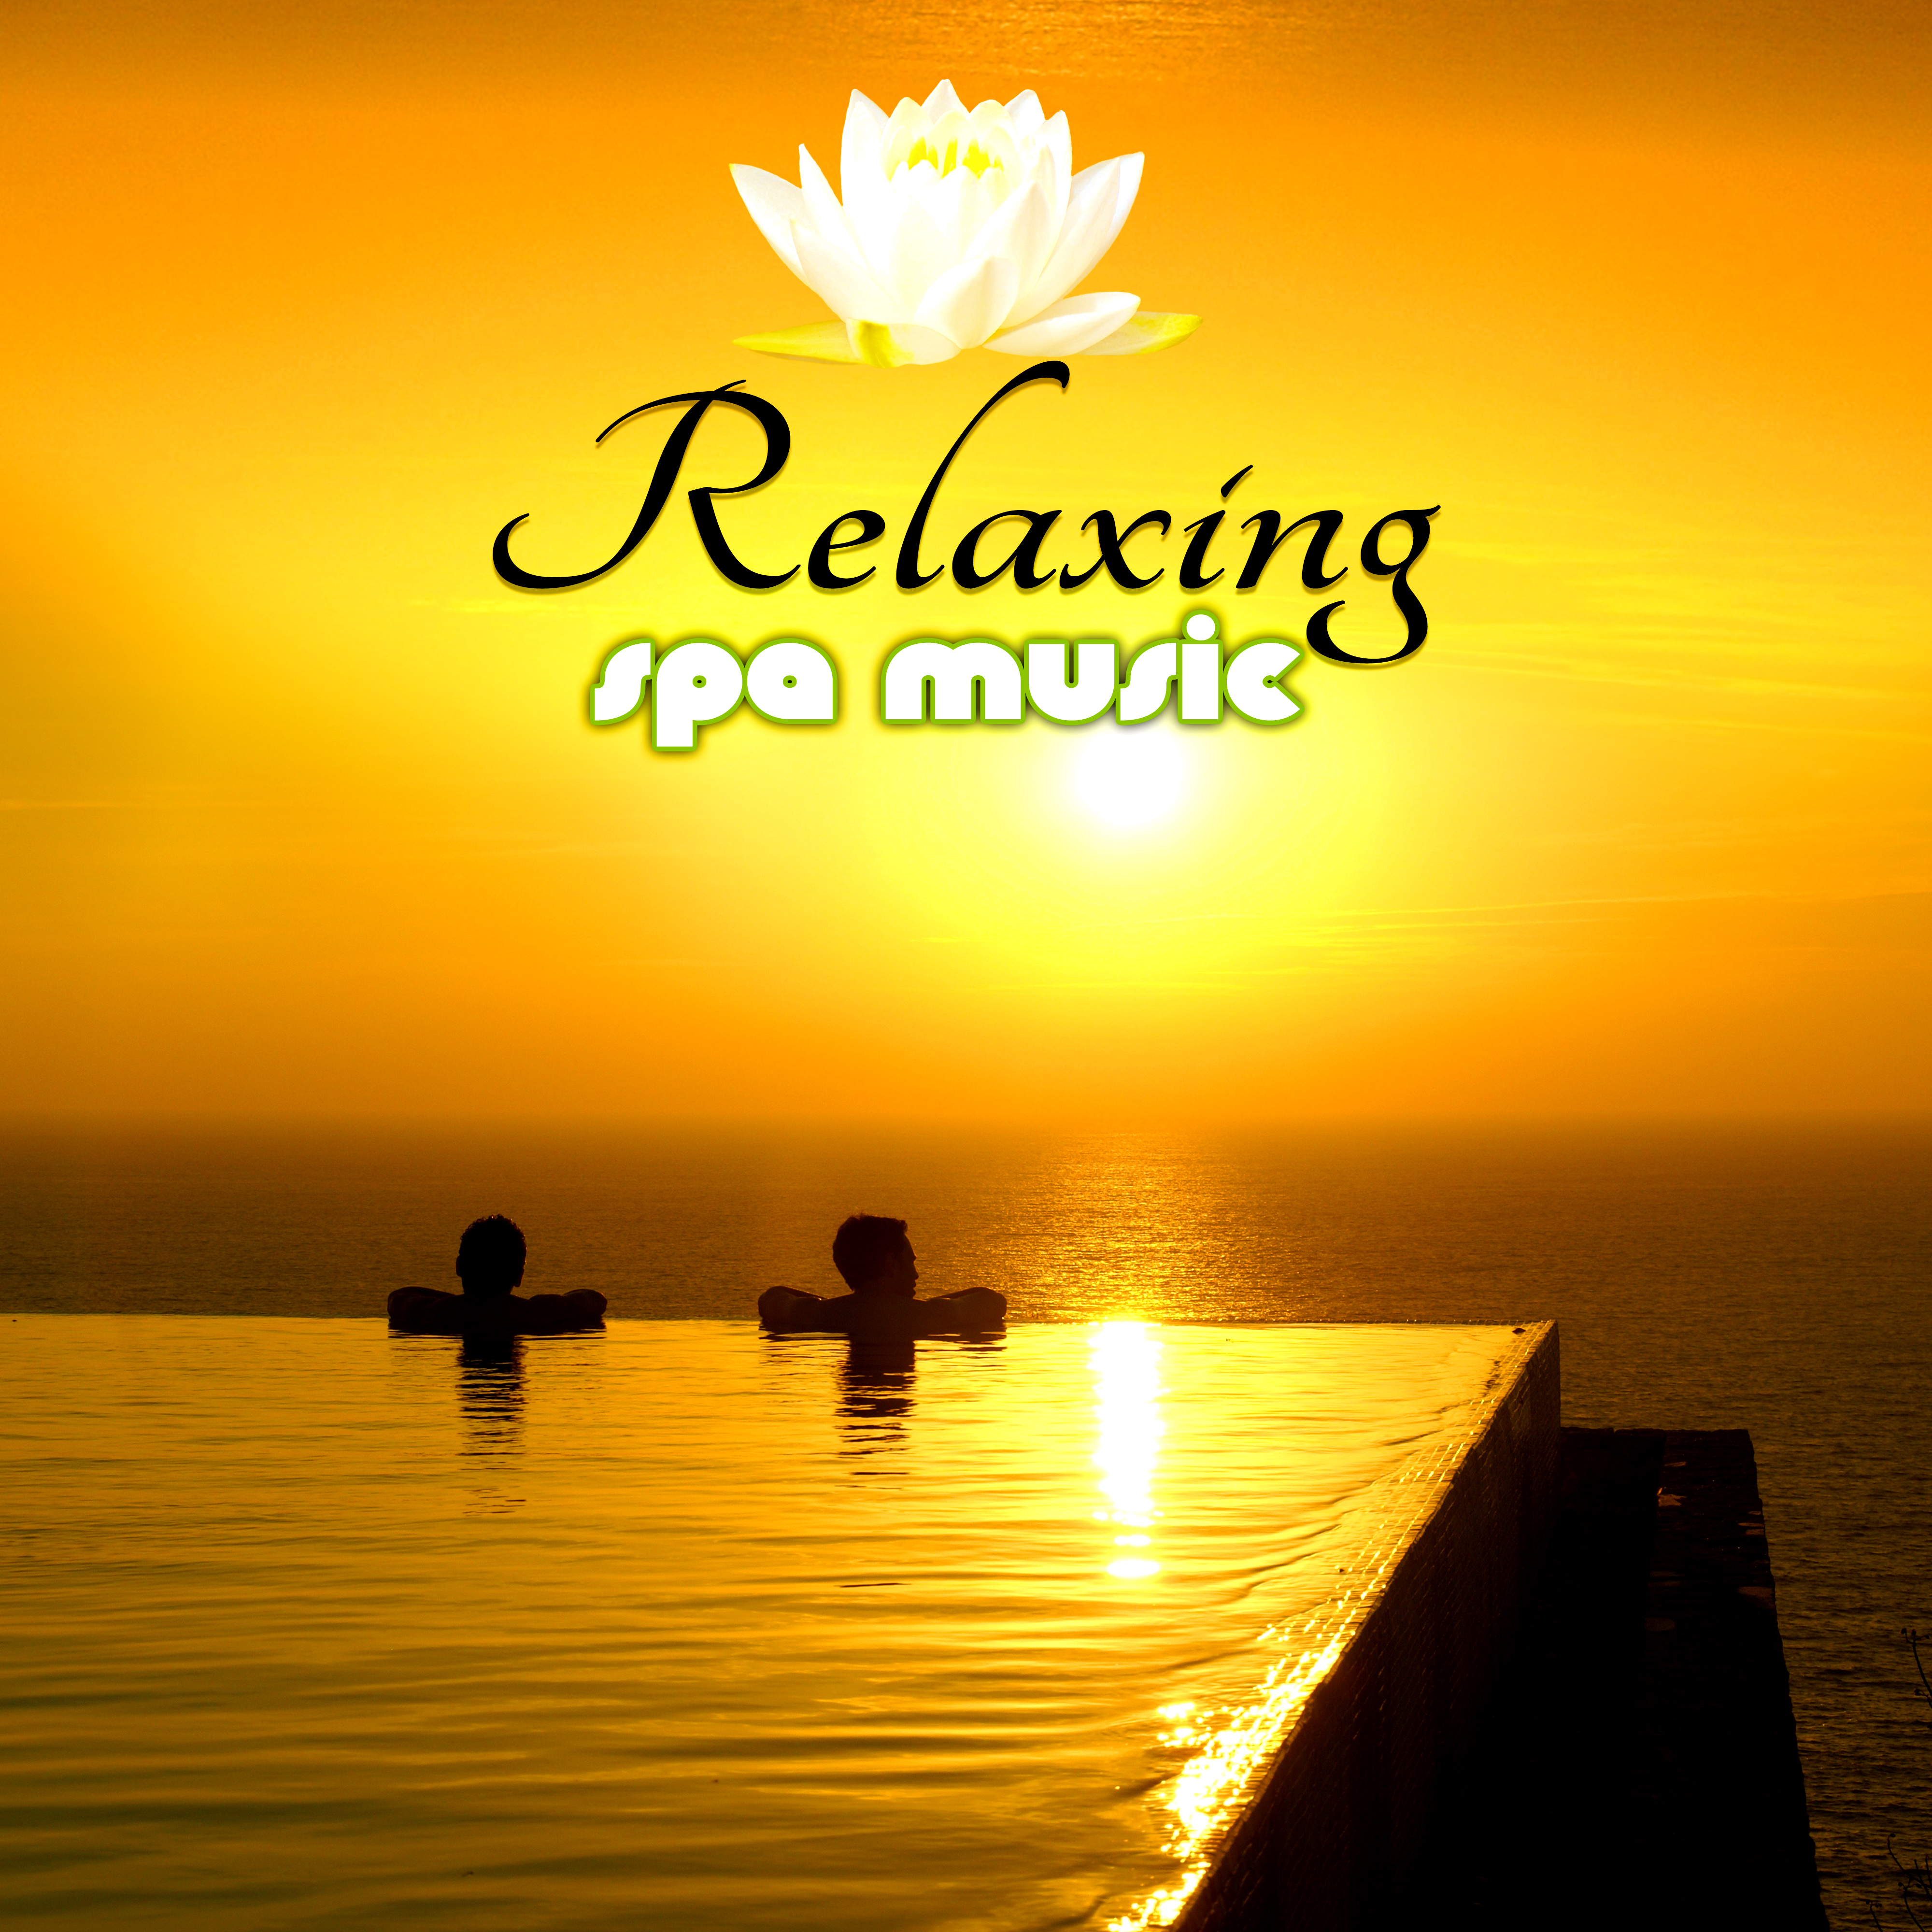 Relaxing Spa Music – Nature Sounds for Relaxation, Meditation, Spa & Wellness, Reiki Healing, Yoga, Ayurveda, Calm Background Music for Oil Massage